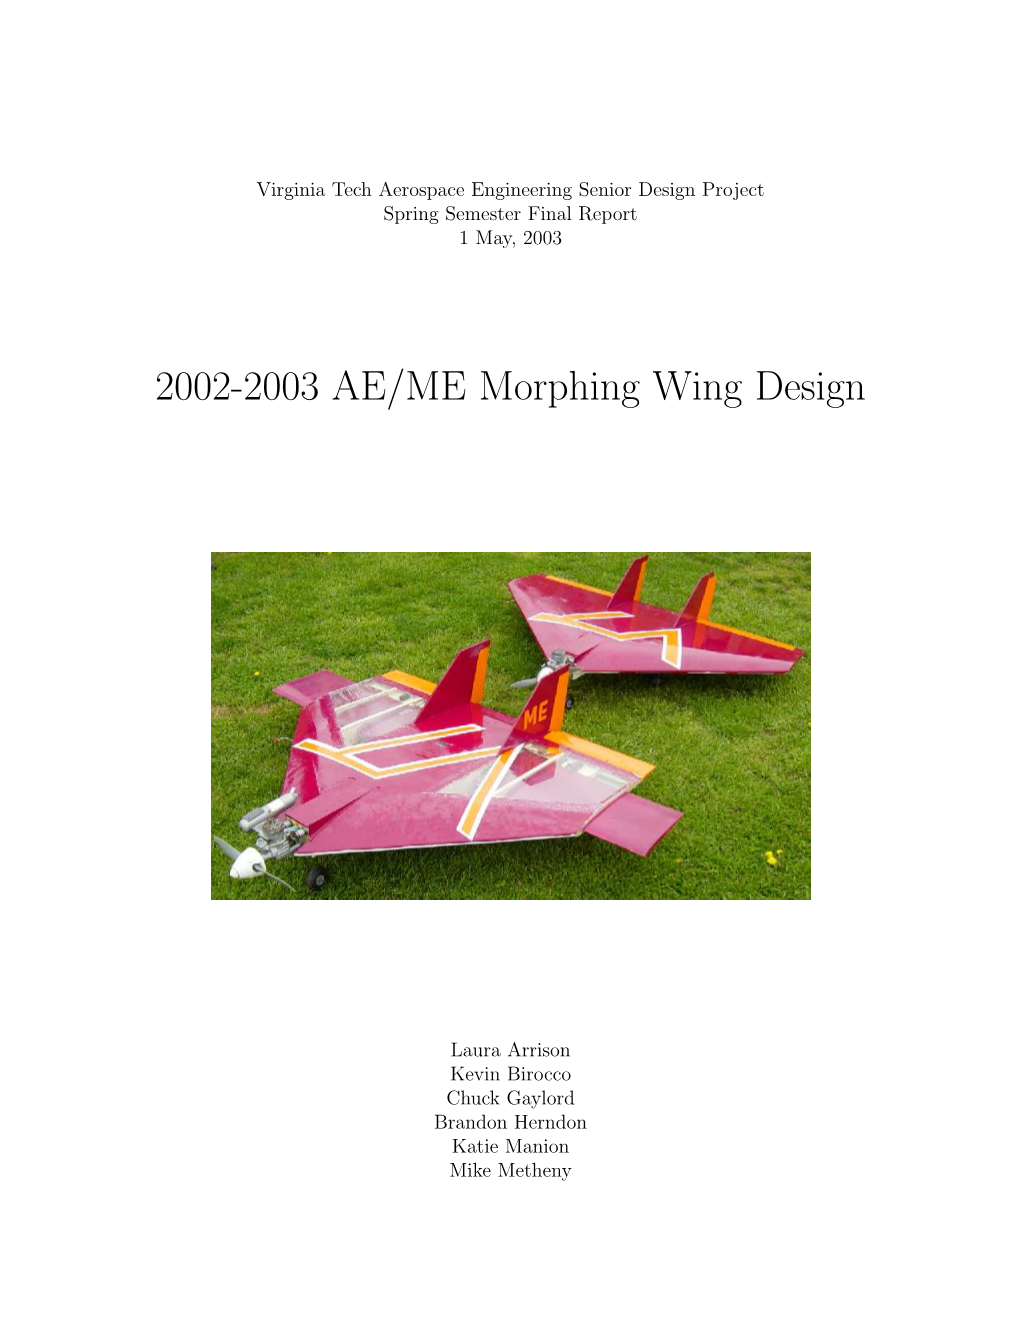 2002-2003 AE/ME Morphing Wing Design